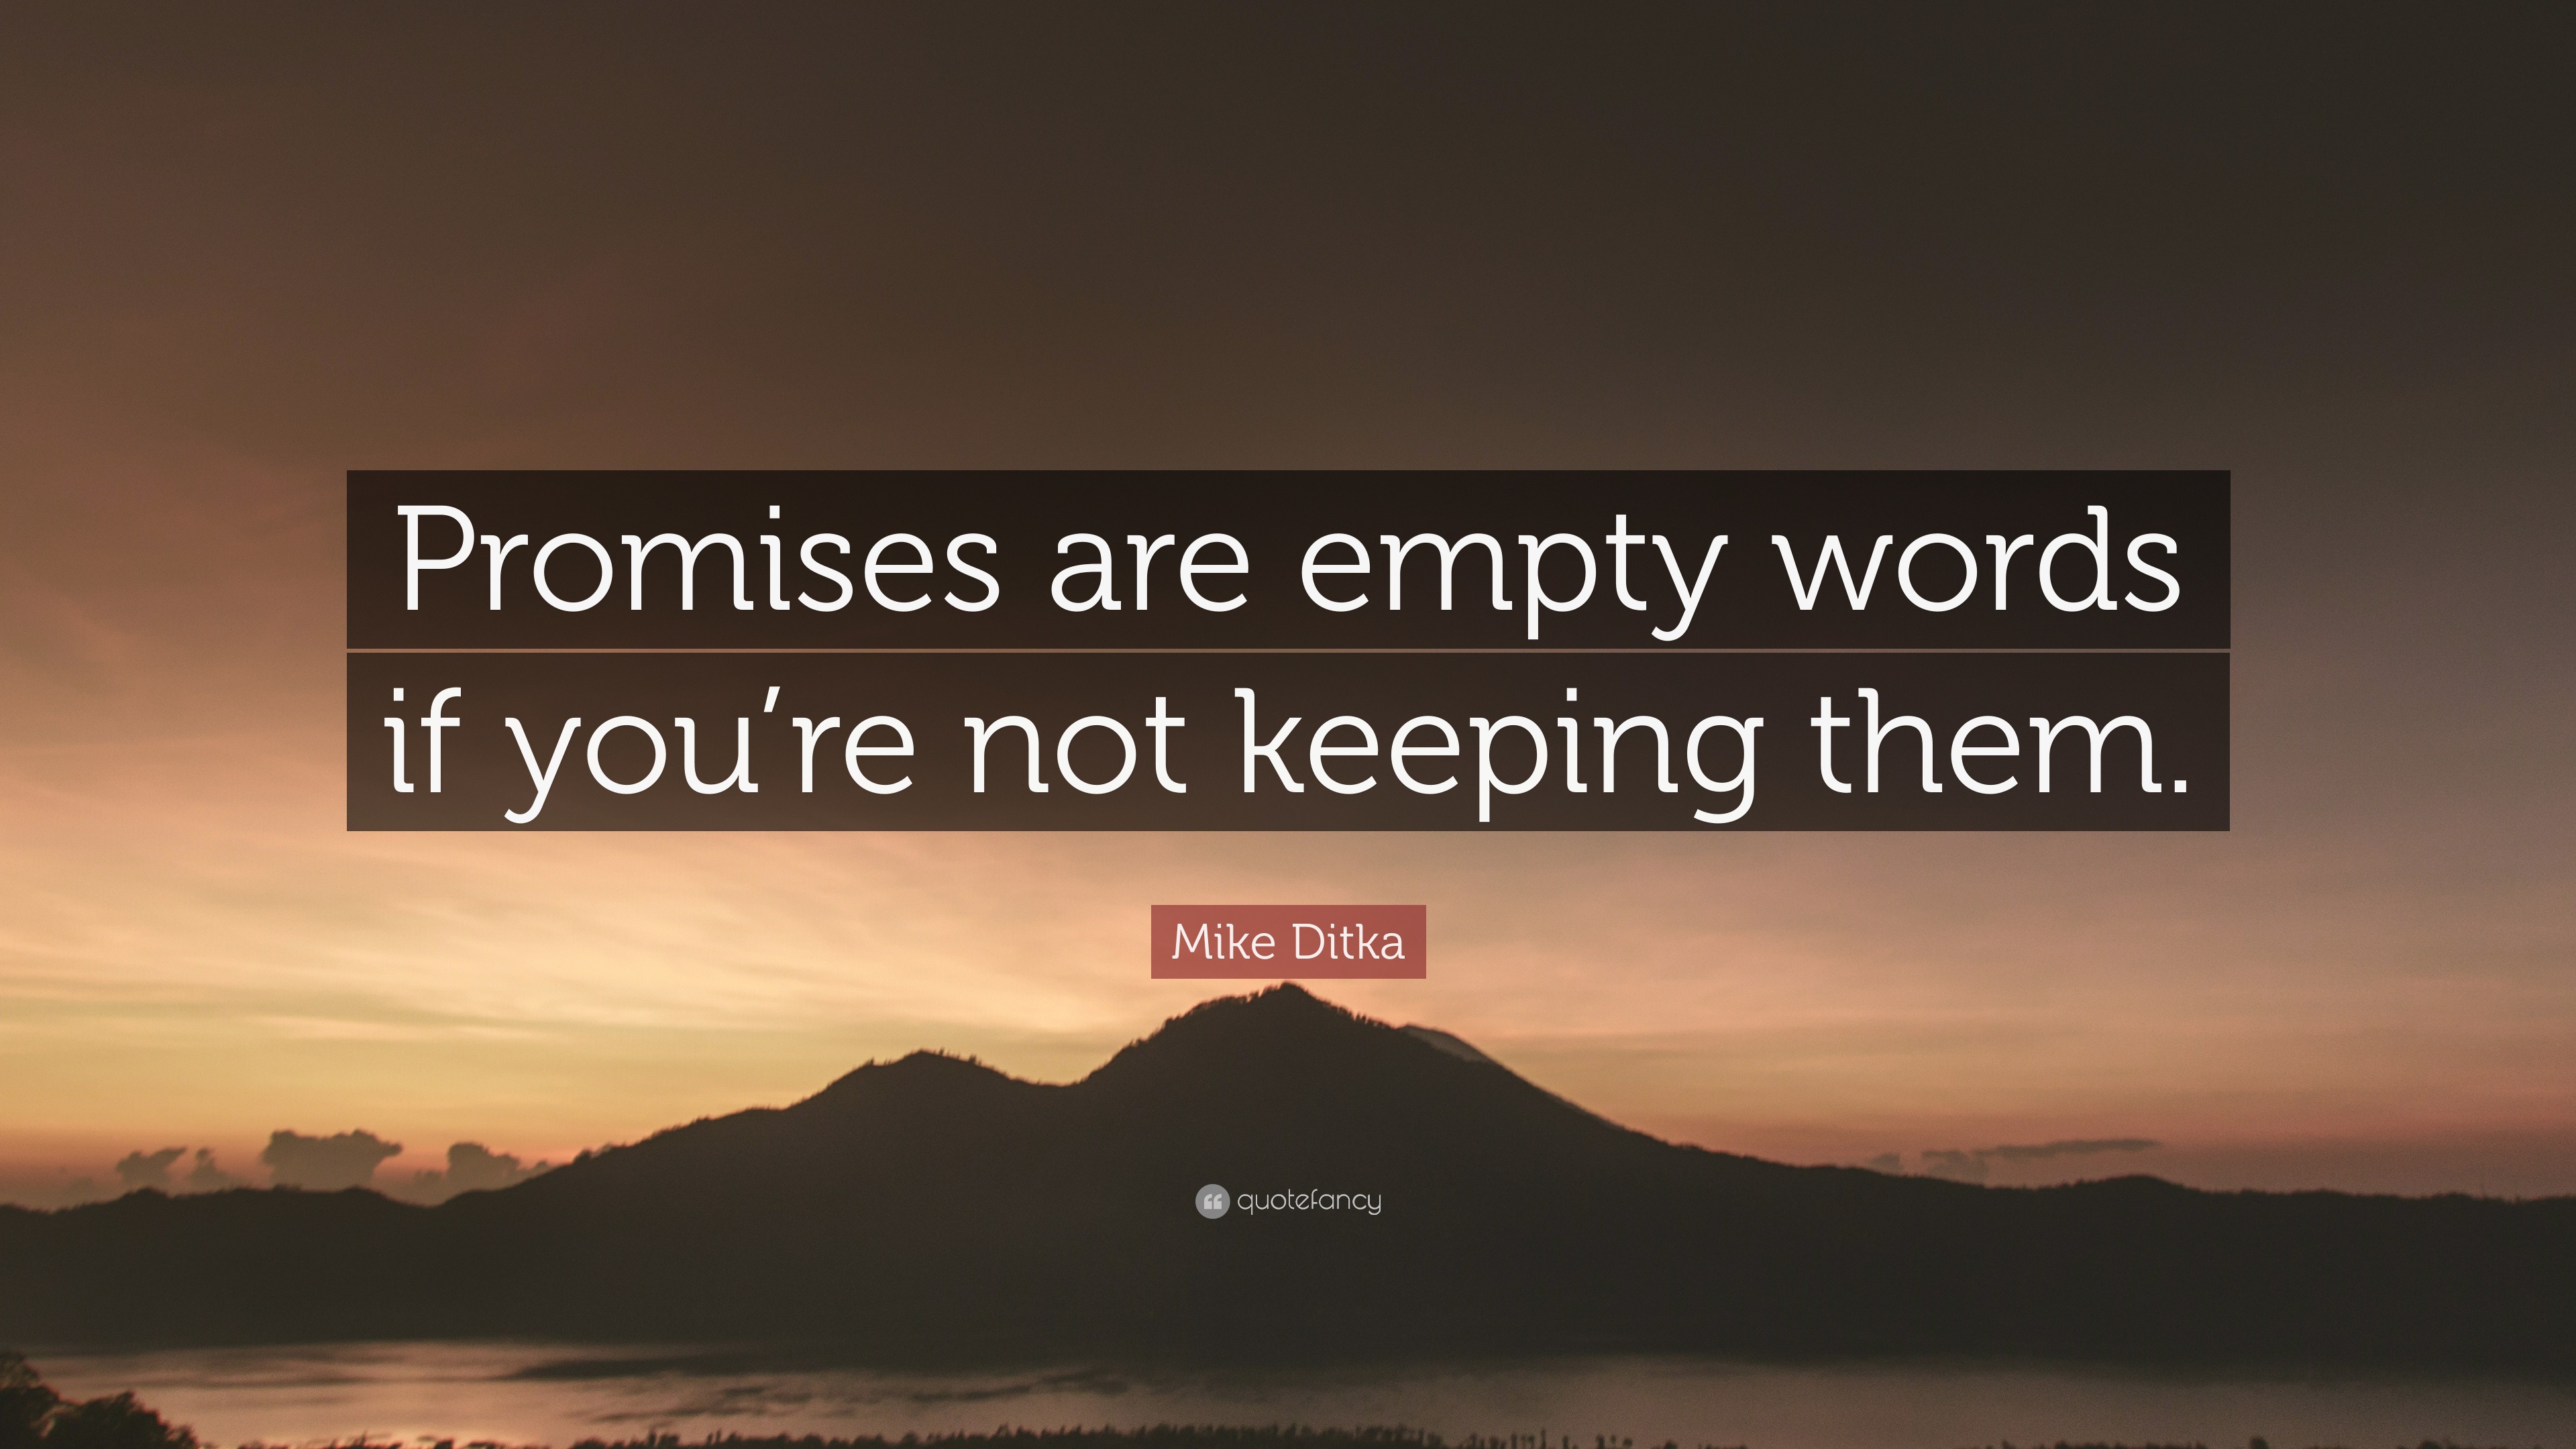 Full Of Empty Promises Quotes : Pin by Jeanie Torgerson on ☯ Inspiring ...